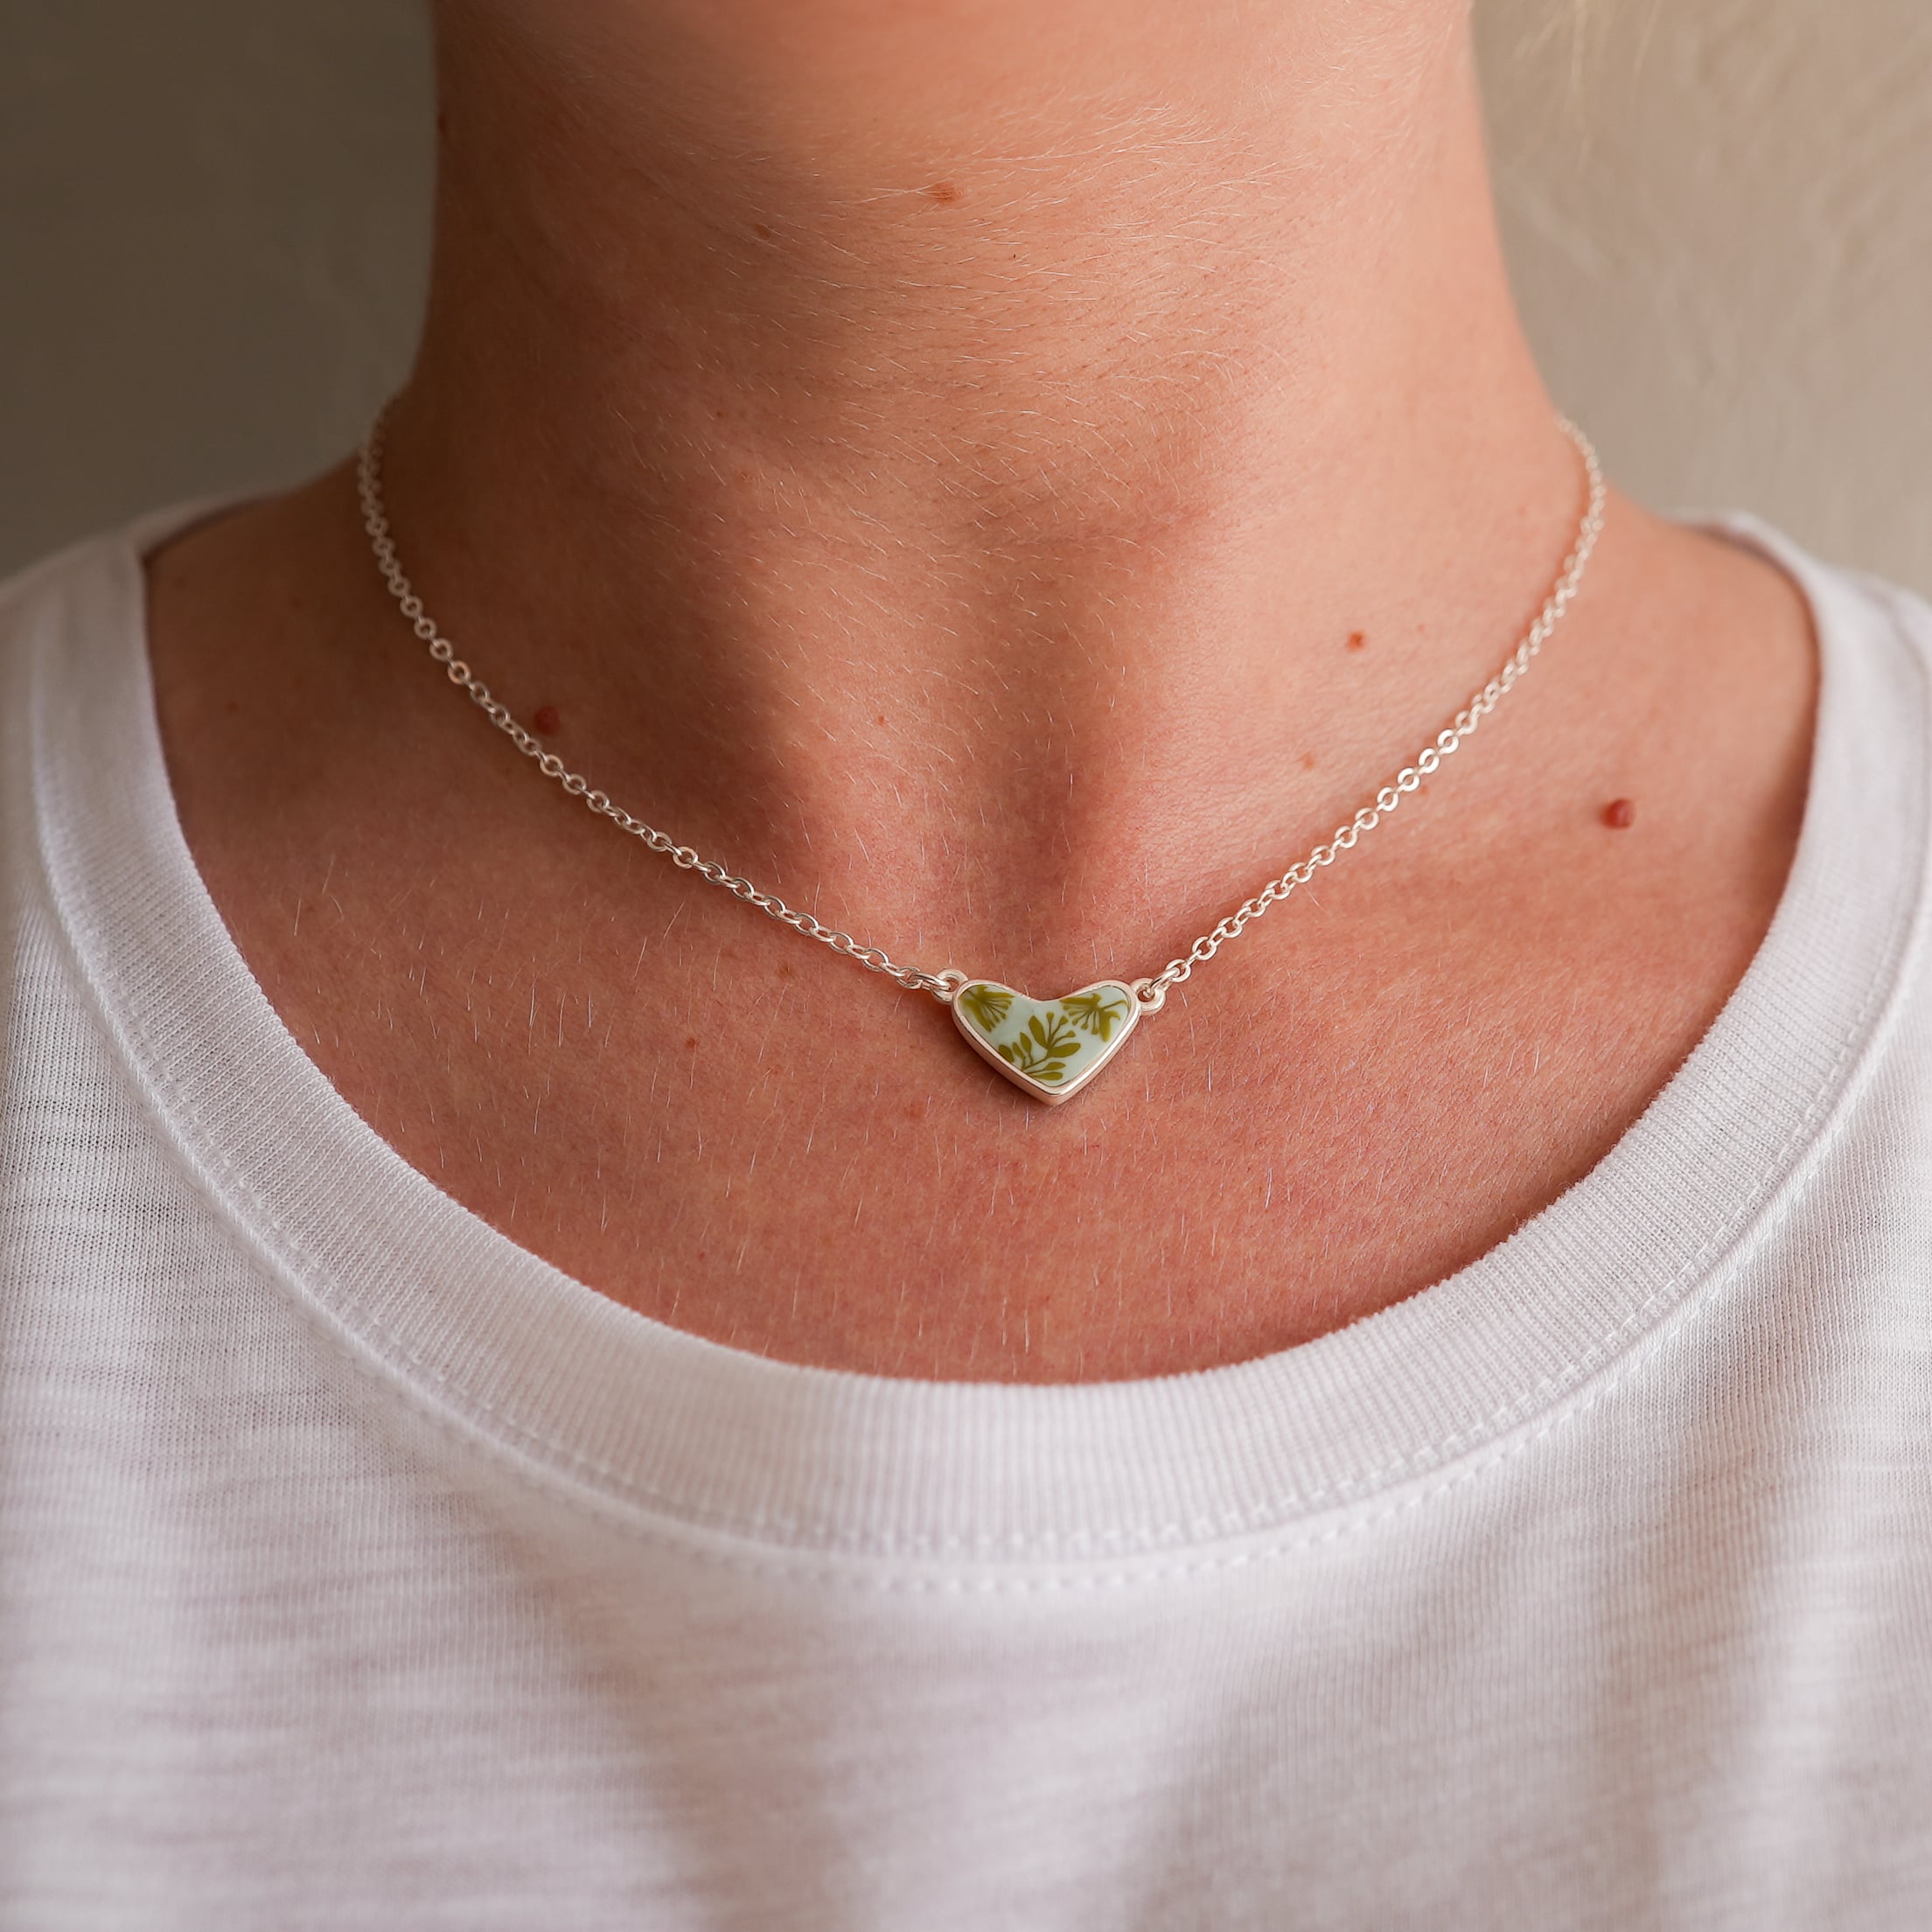 People We Love Necklace: Mother image